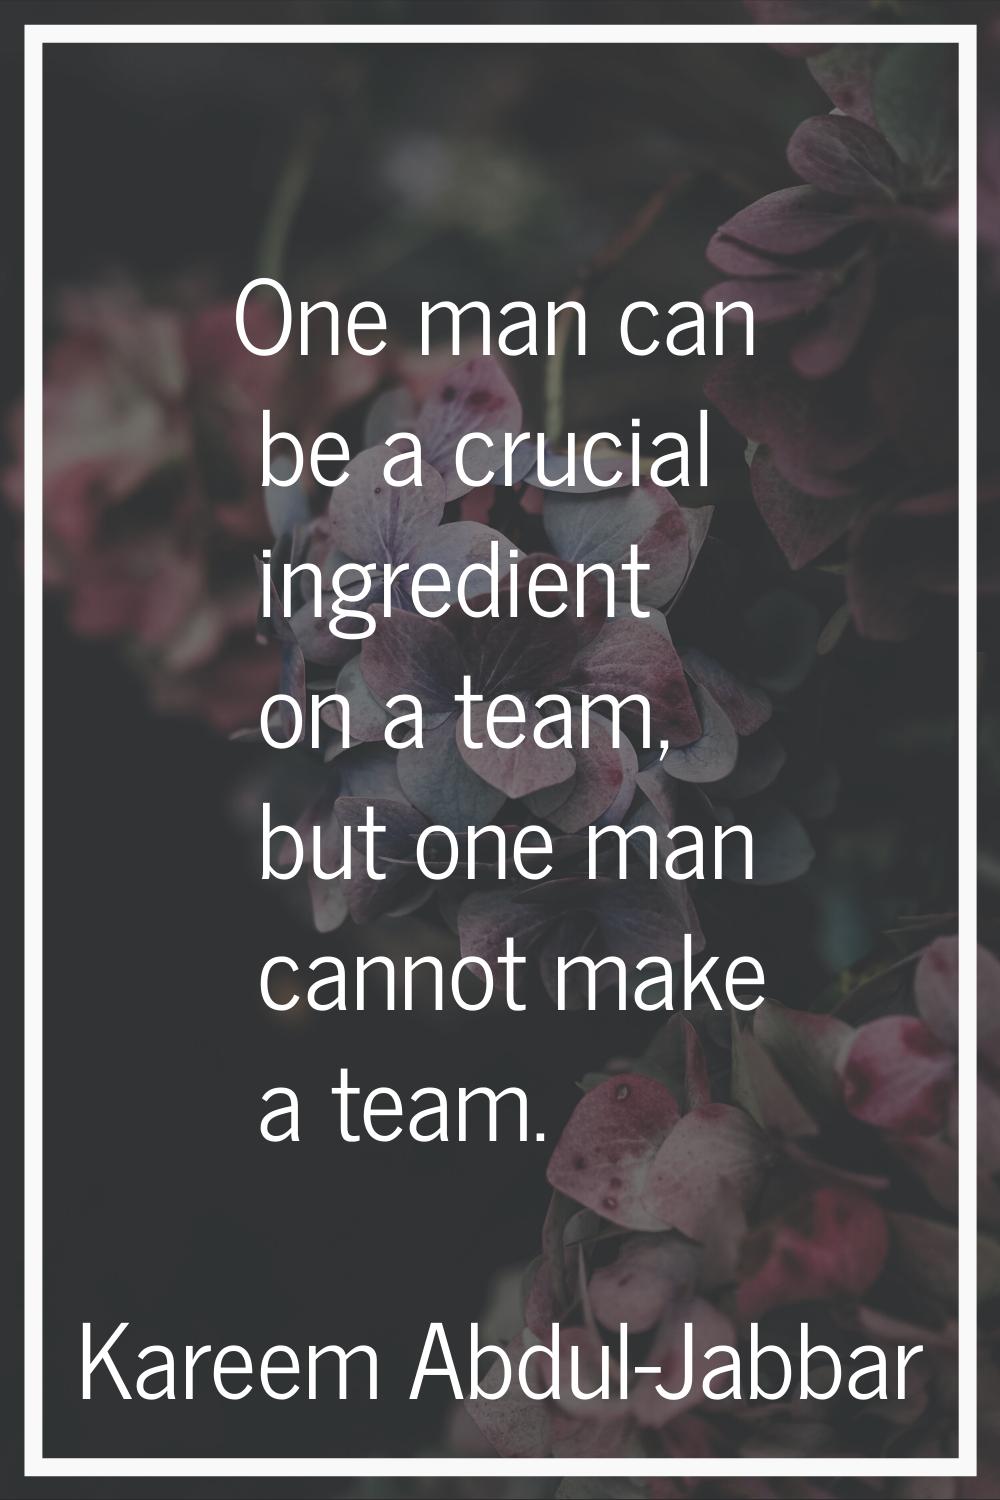 One man can be a crucial ingredient on a team, but one man cannot make a team.